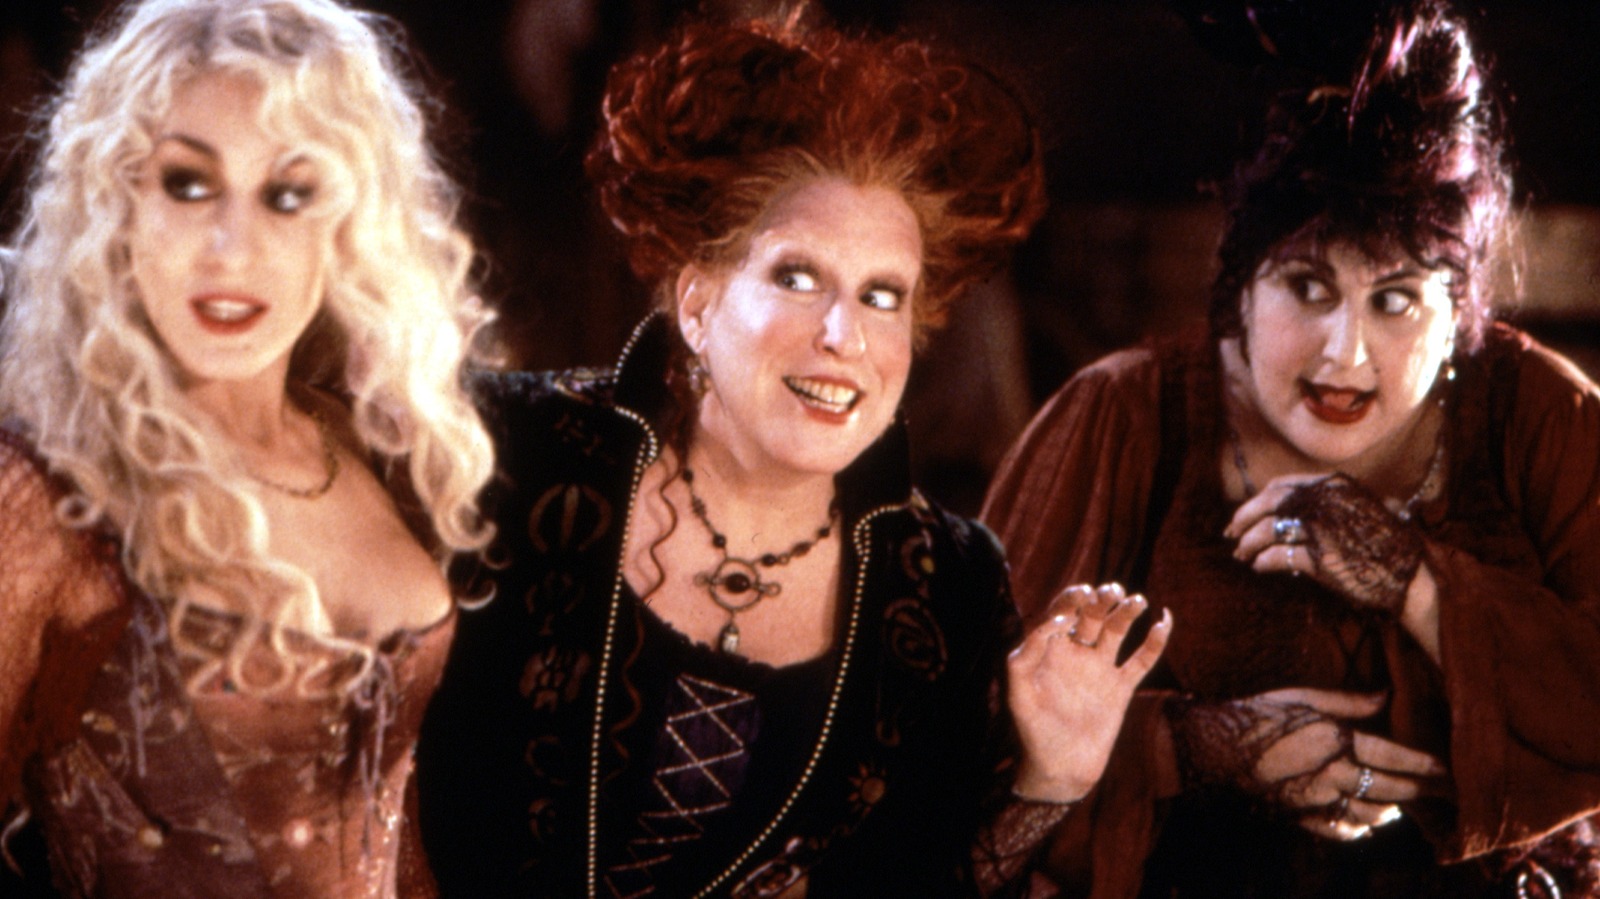 Review: 'Hocus Pocus 2' will put a funny-scary spell on you - Good